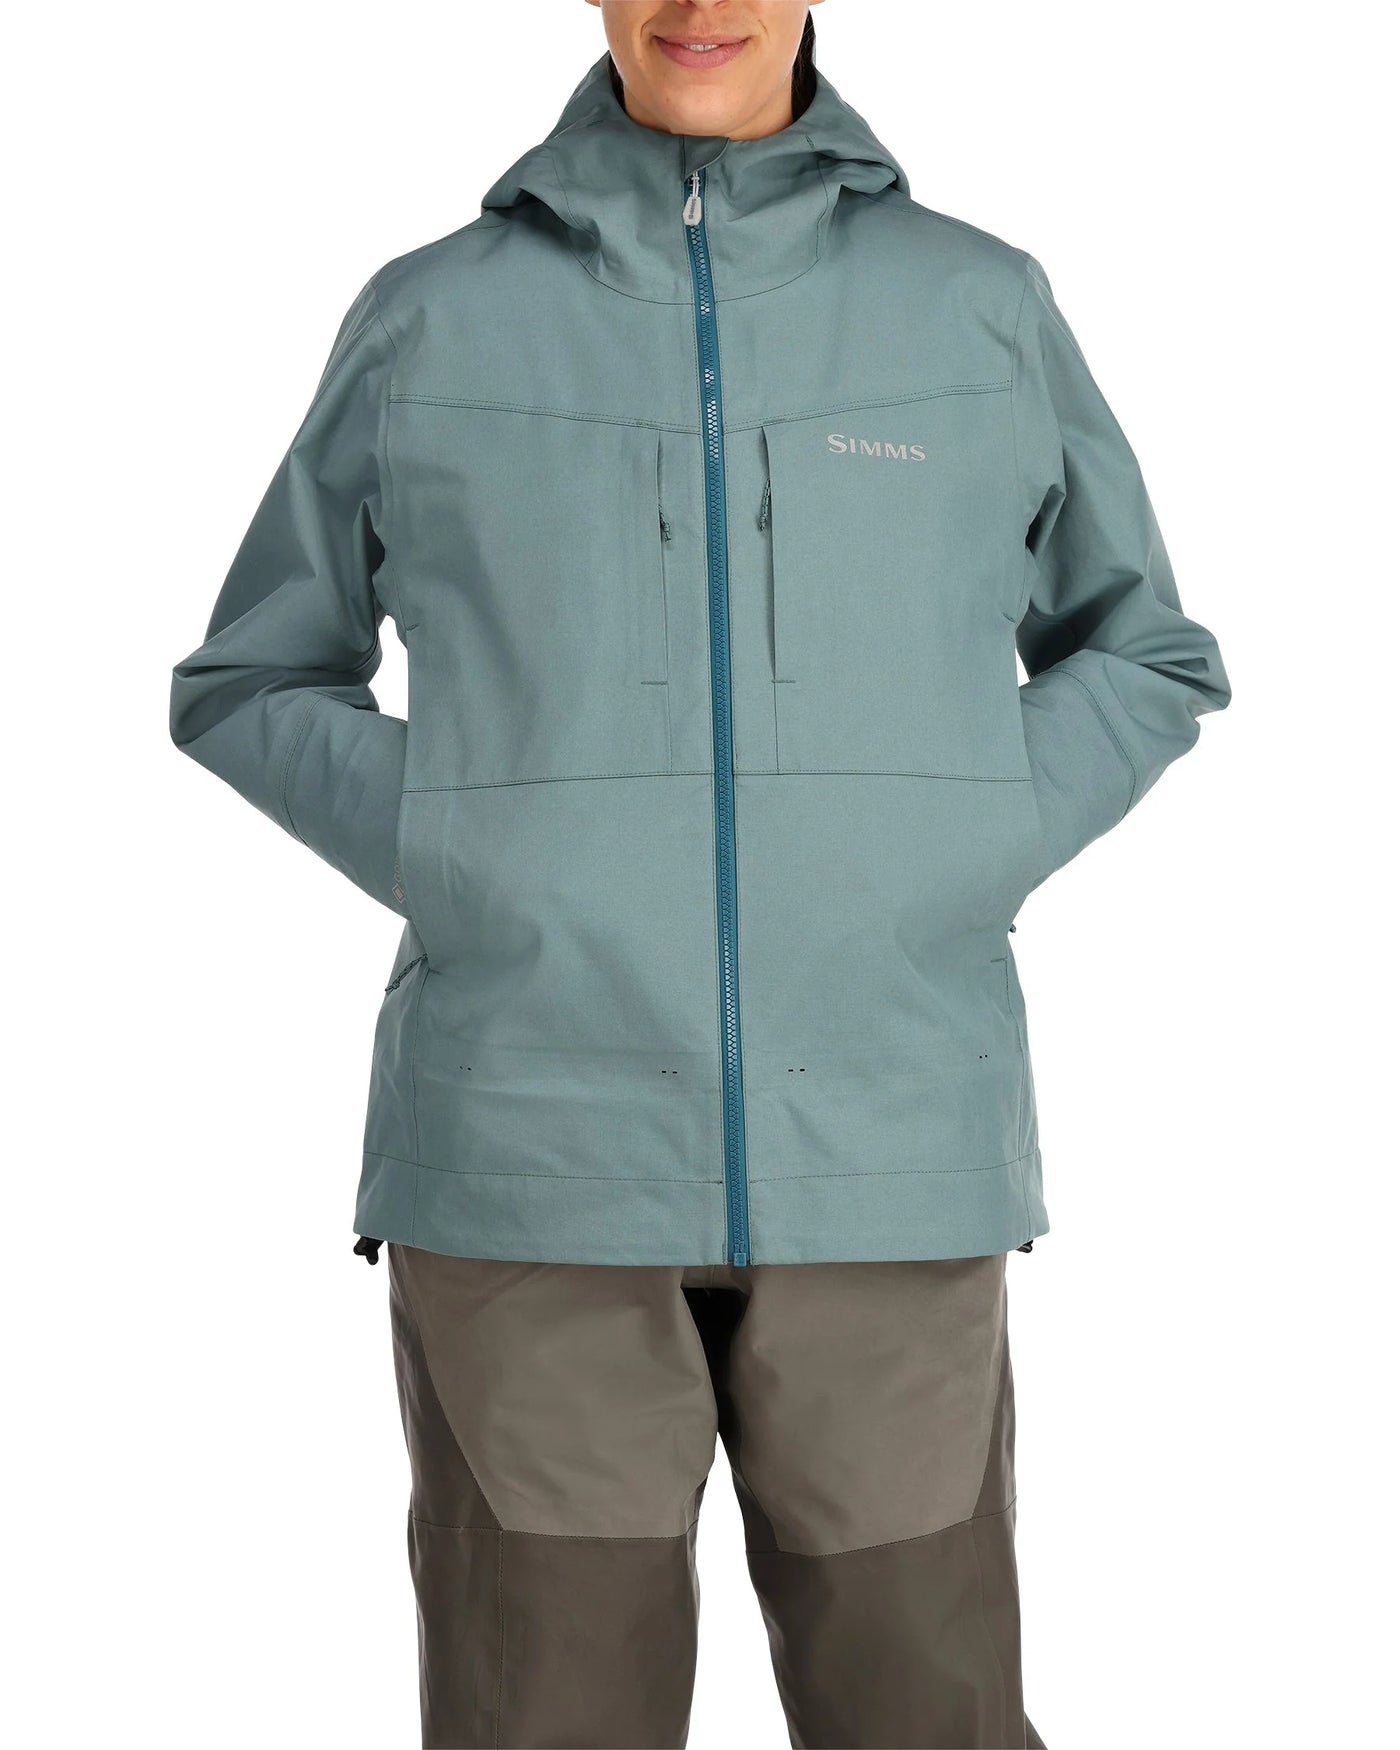 Simms G3 Guide Jacket - Women's - Avalon Teal - M